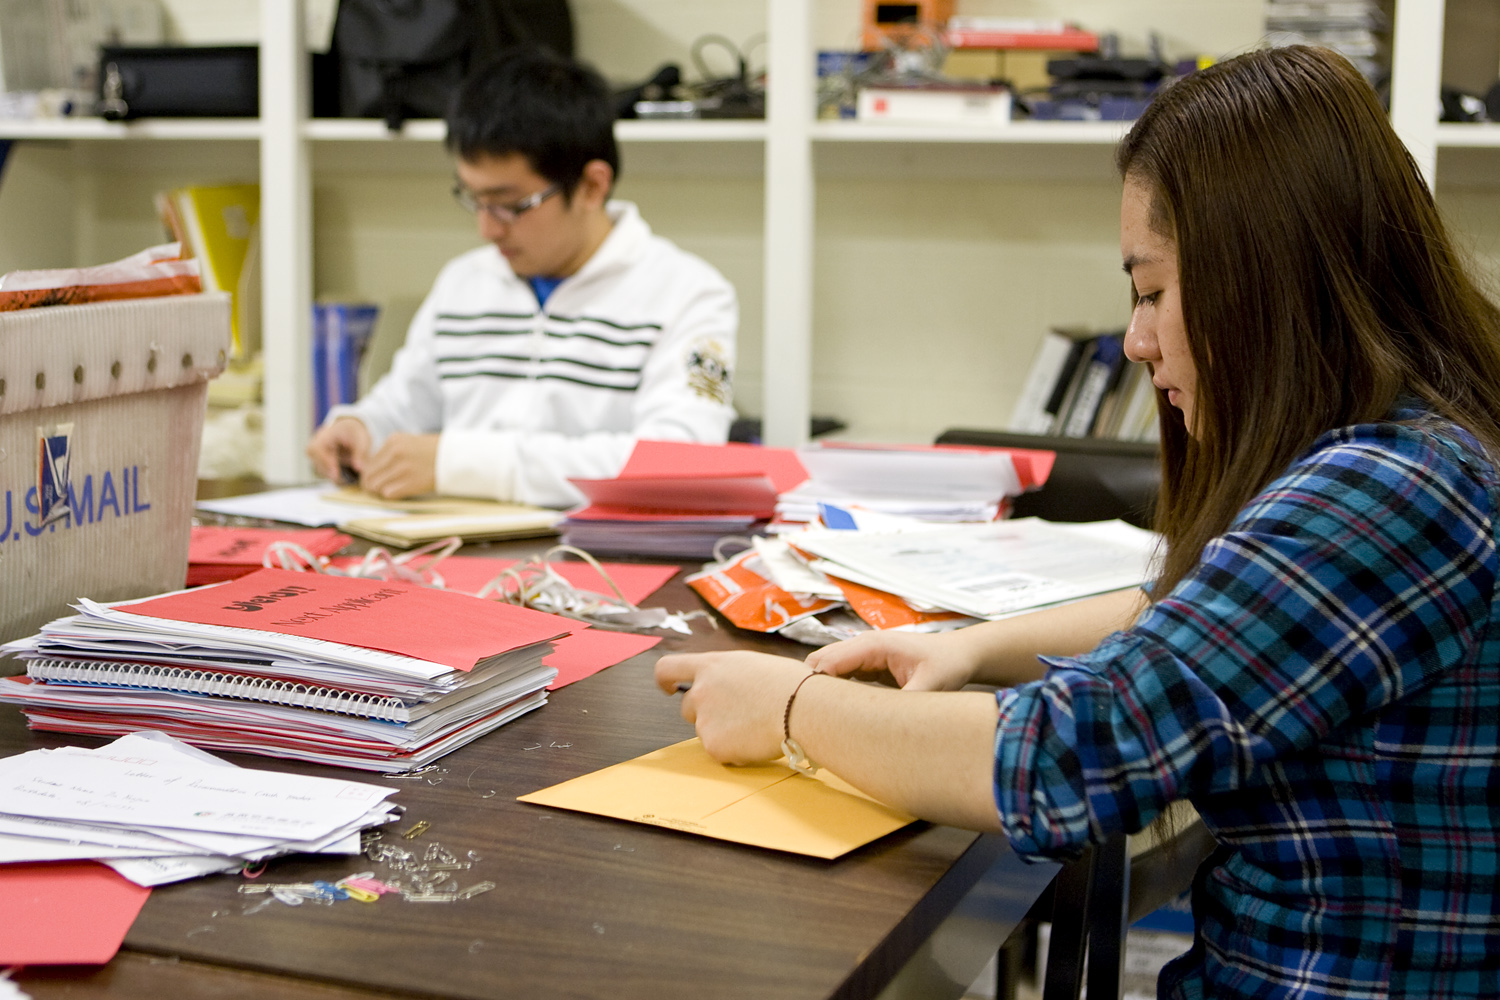 TingTing Jin (foreground) and Yujunjie Wu  working on packing letters to be mailed